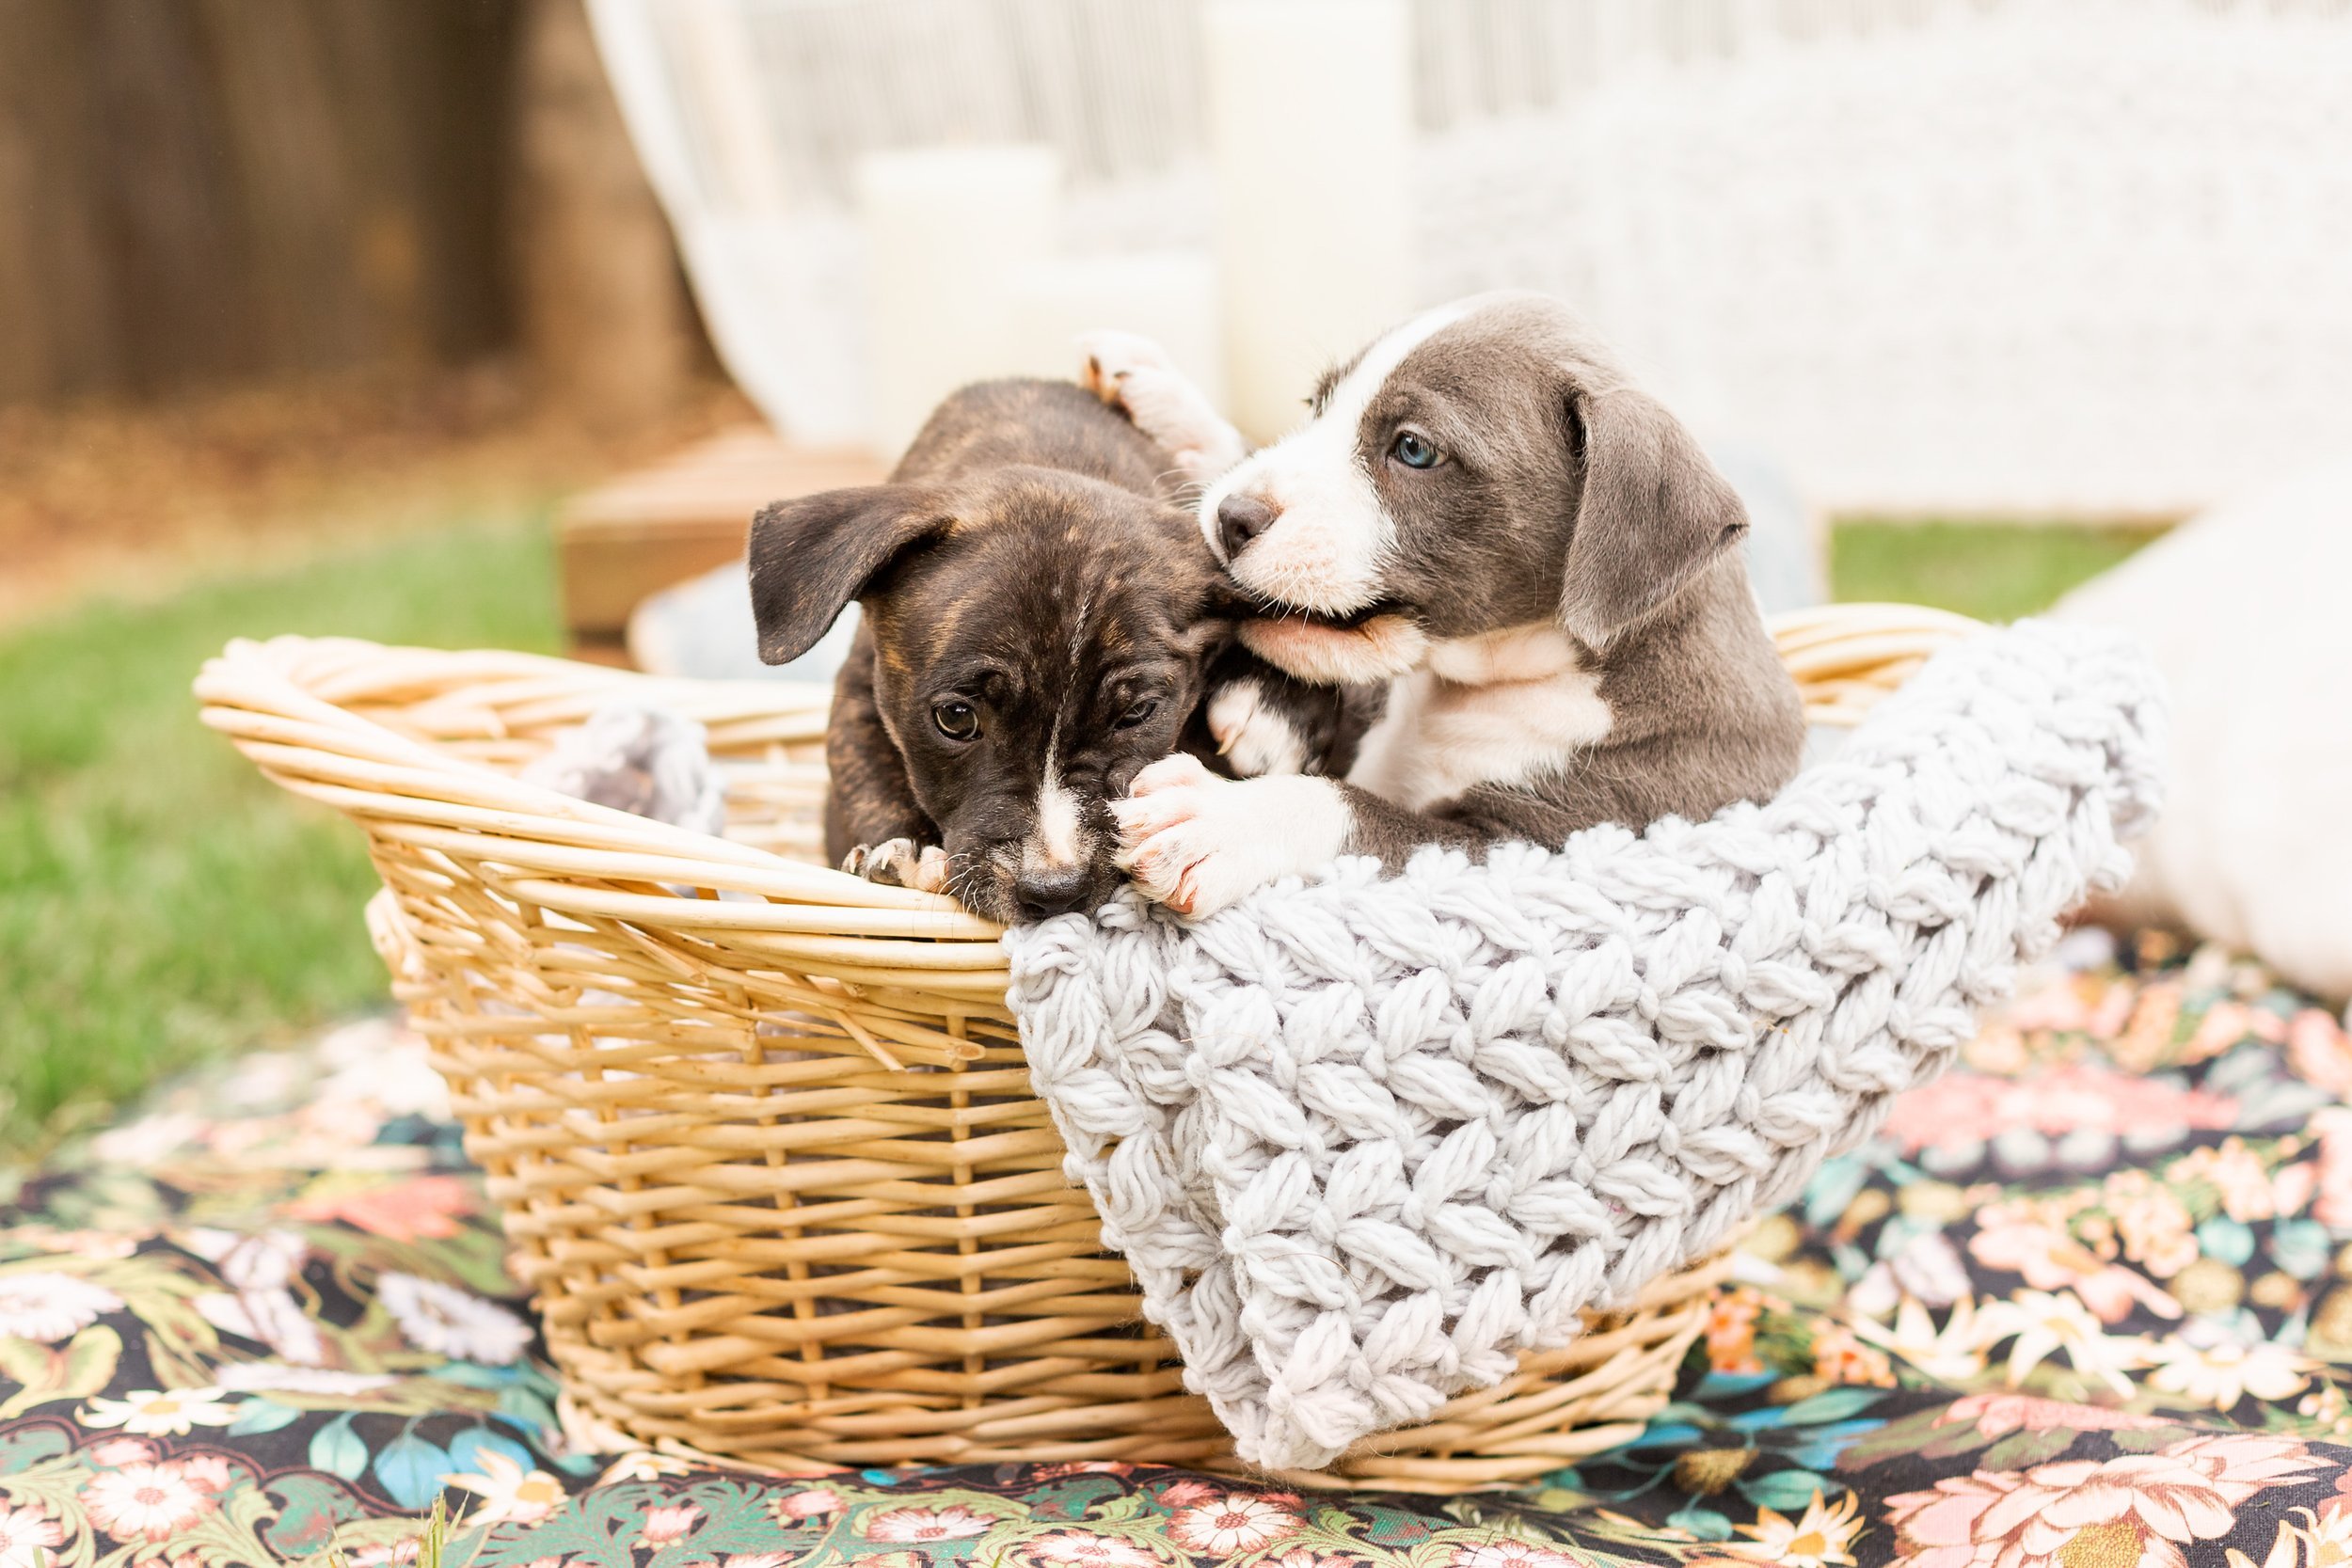 www.santabarbarawedding.com | Veils &amp; Tails Photography | Pitbull Puppies Chewing on Each Other in a Basket 